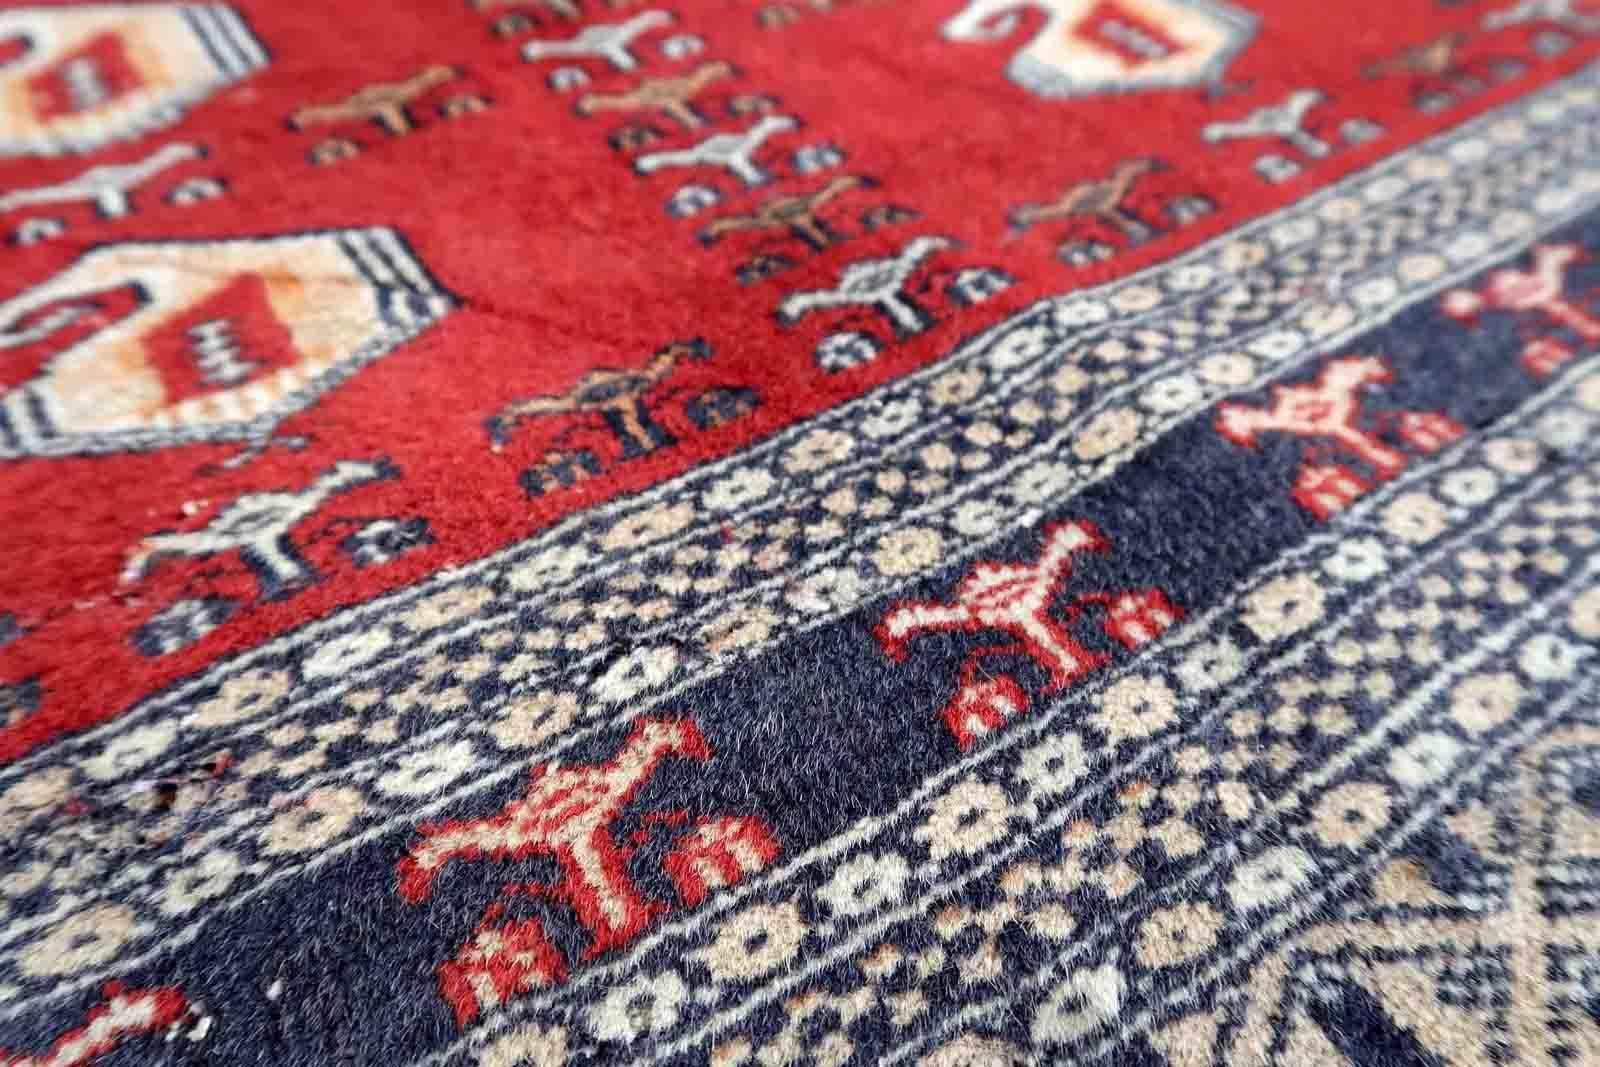 Handmade vintage Uzbek Bukhara rug in red color. The rug has been made in wool in the middle of 20th century. It is in original condition, it has some low pile.

-condition: original, some low pile,

-circa: 1960s,

-size: 4.1' x 6.4 (126cm x